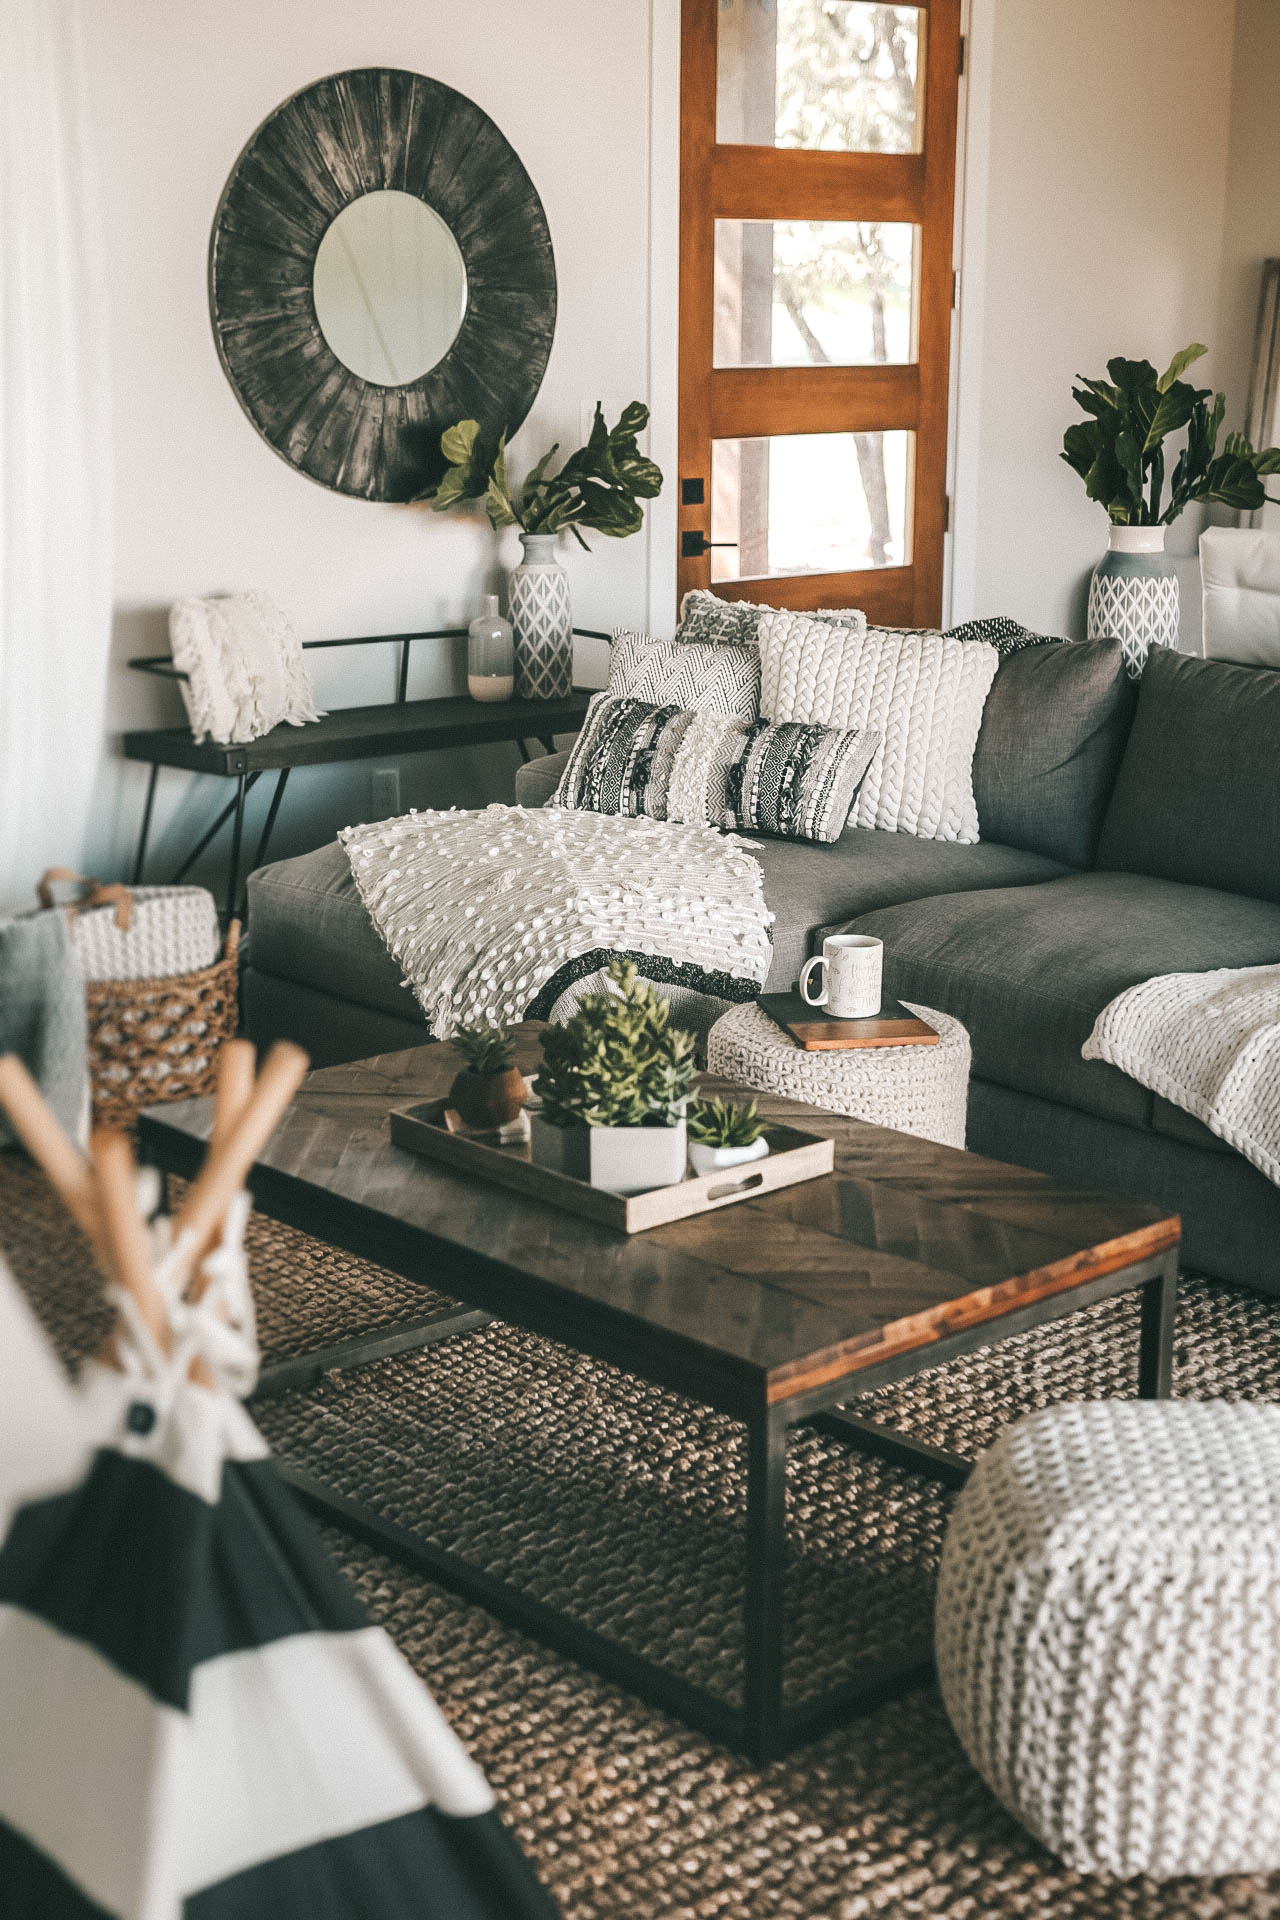 DTKAustin shares a sneak peek into her newly built home. She styled the modern farmhouse with Nordstrom Home Decor on a budget. - Fall Home Decor for a Cozier Home with Nordstrom Decor featured by popular Austin life and style blogger, Dressed to Kill